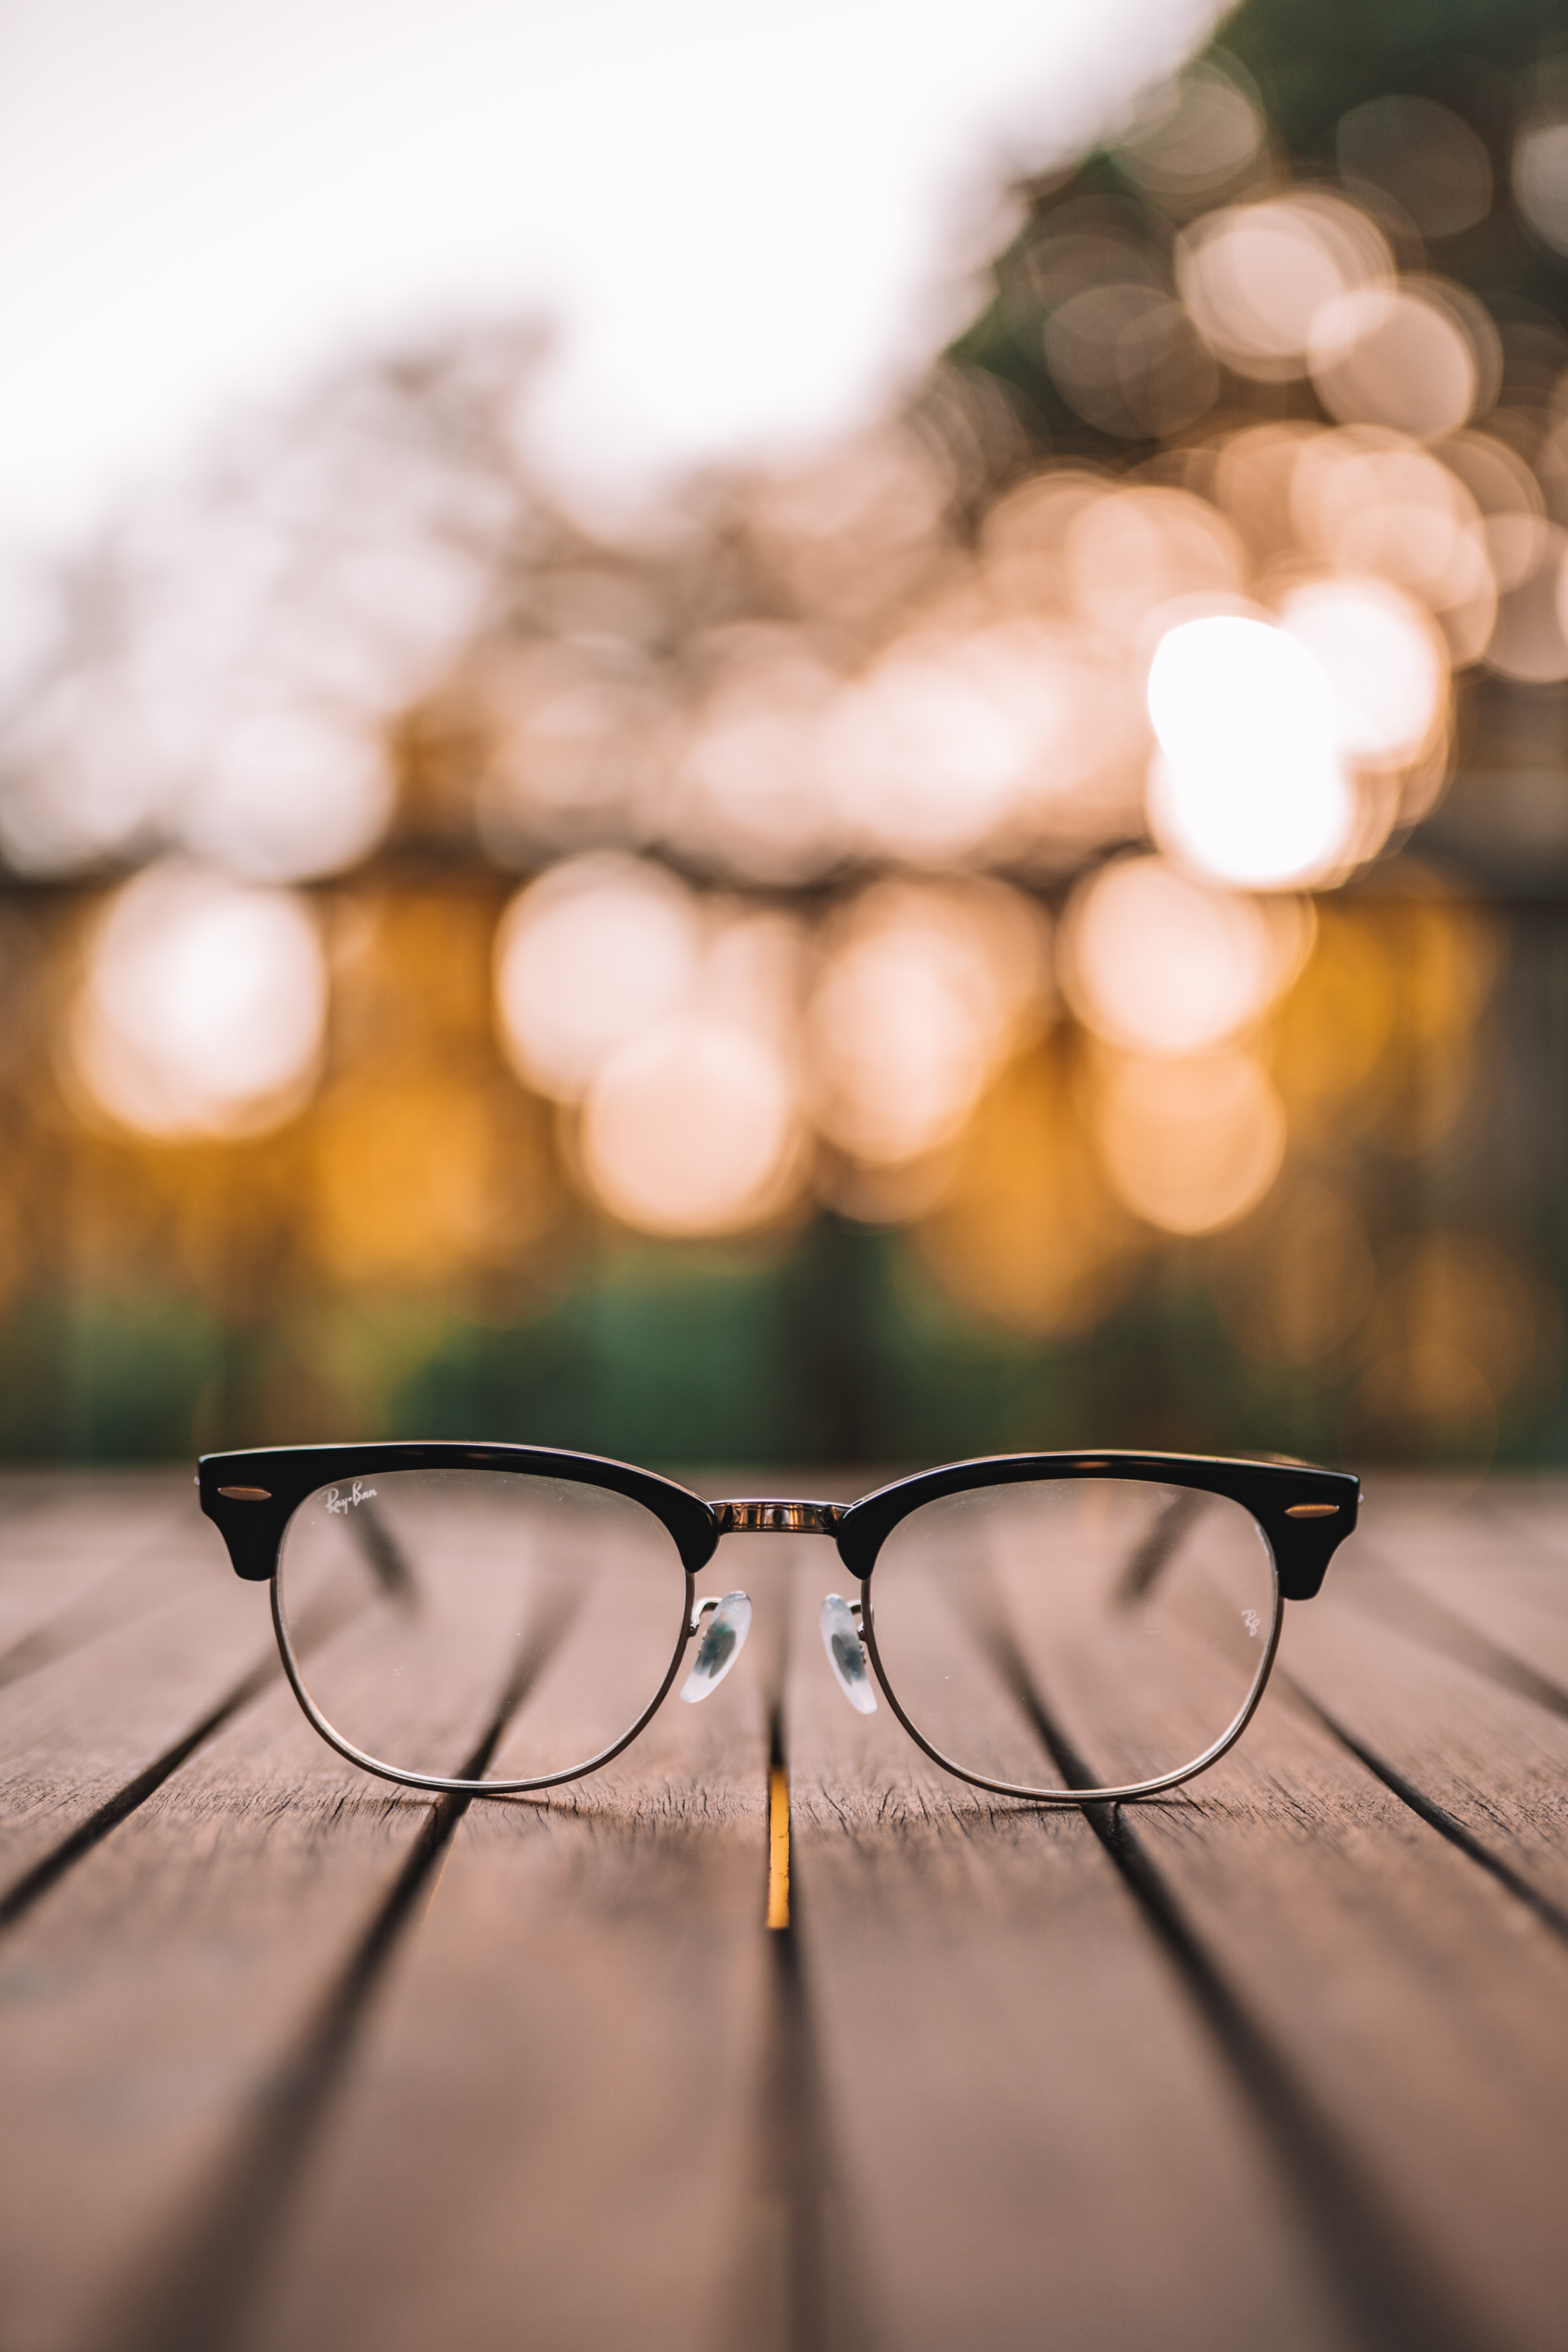 miscellanea, miscellaneous, wood, wooden, blur, smooth, lenses, planks, board, glasses, spectacles Full HD